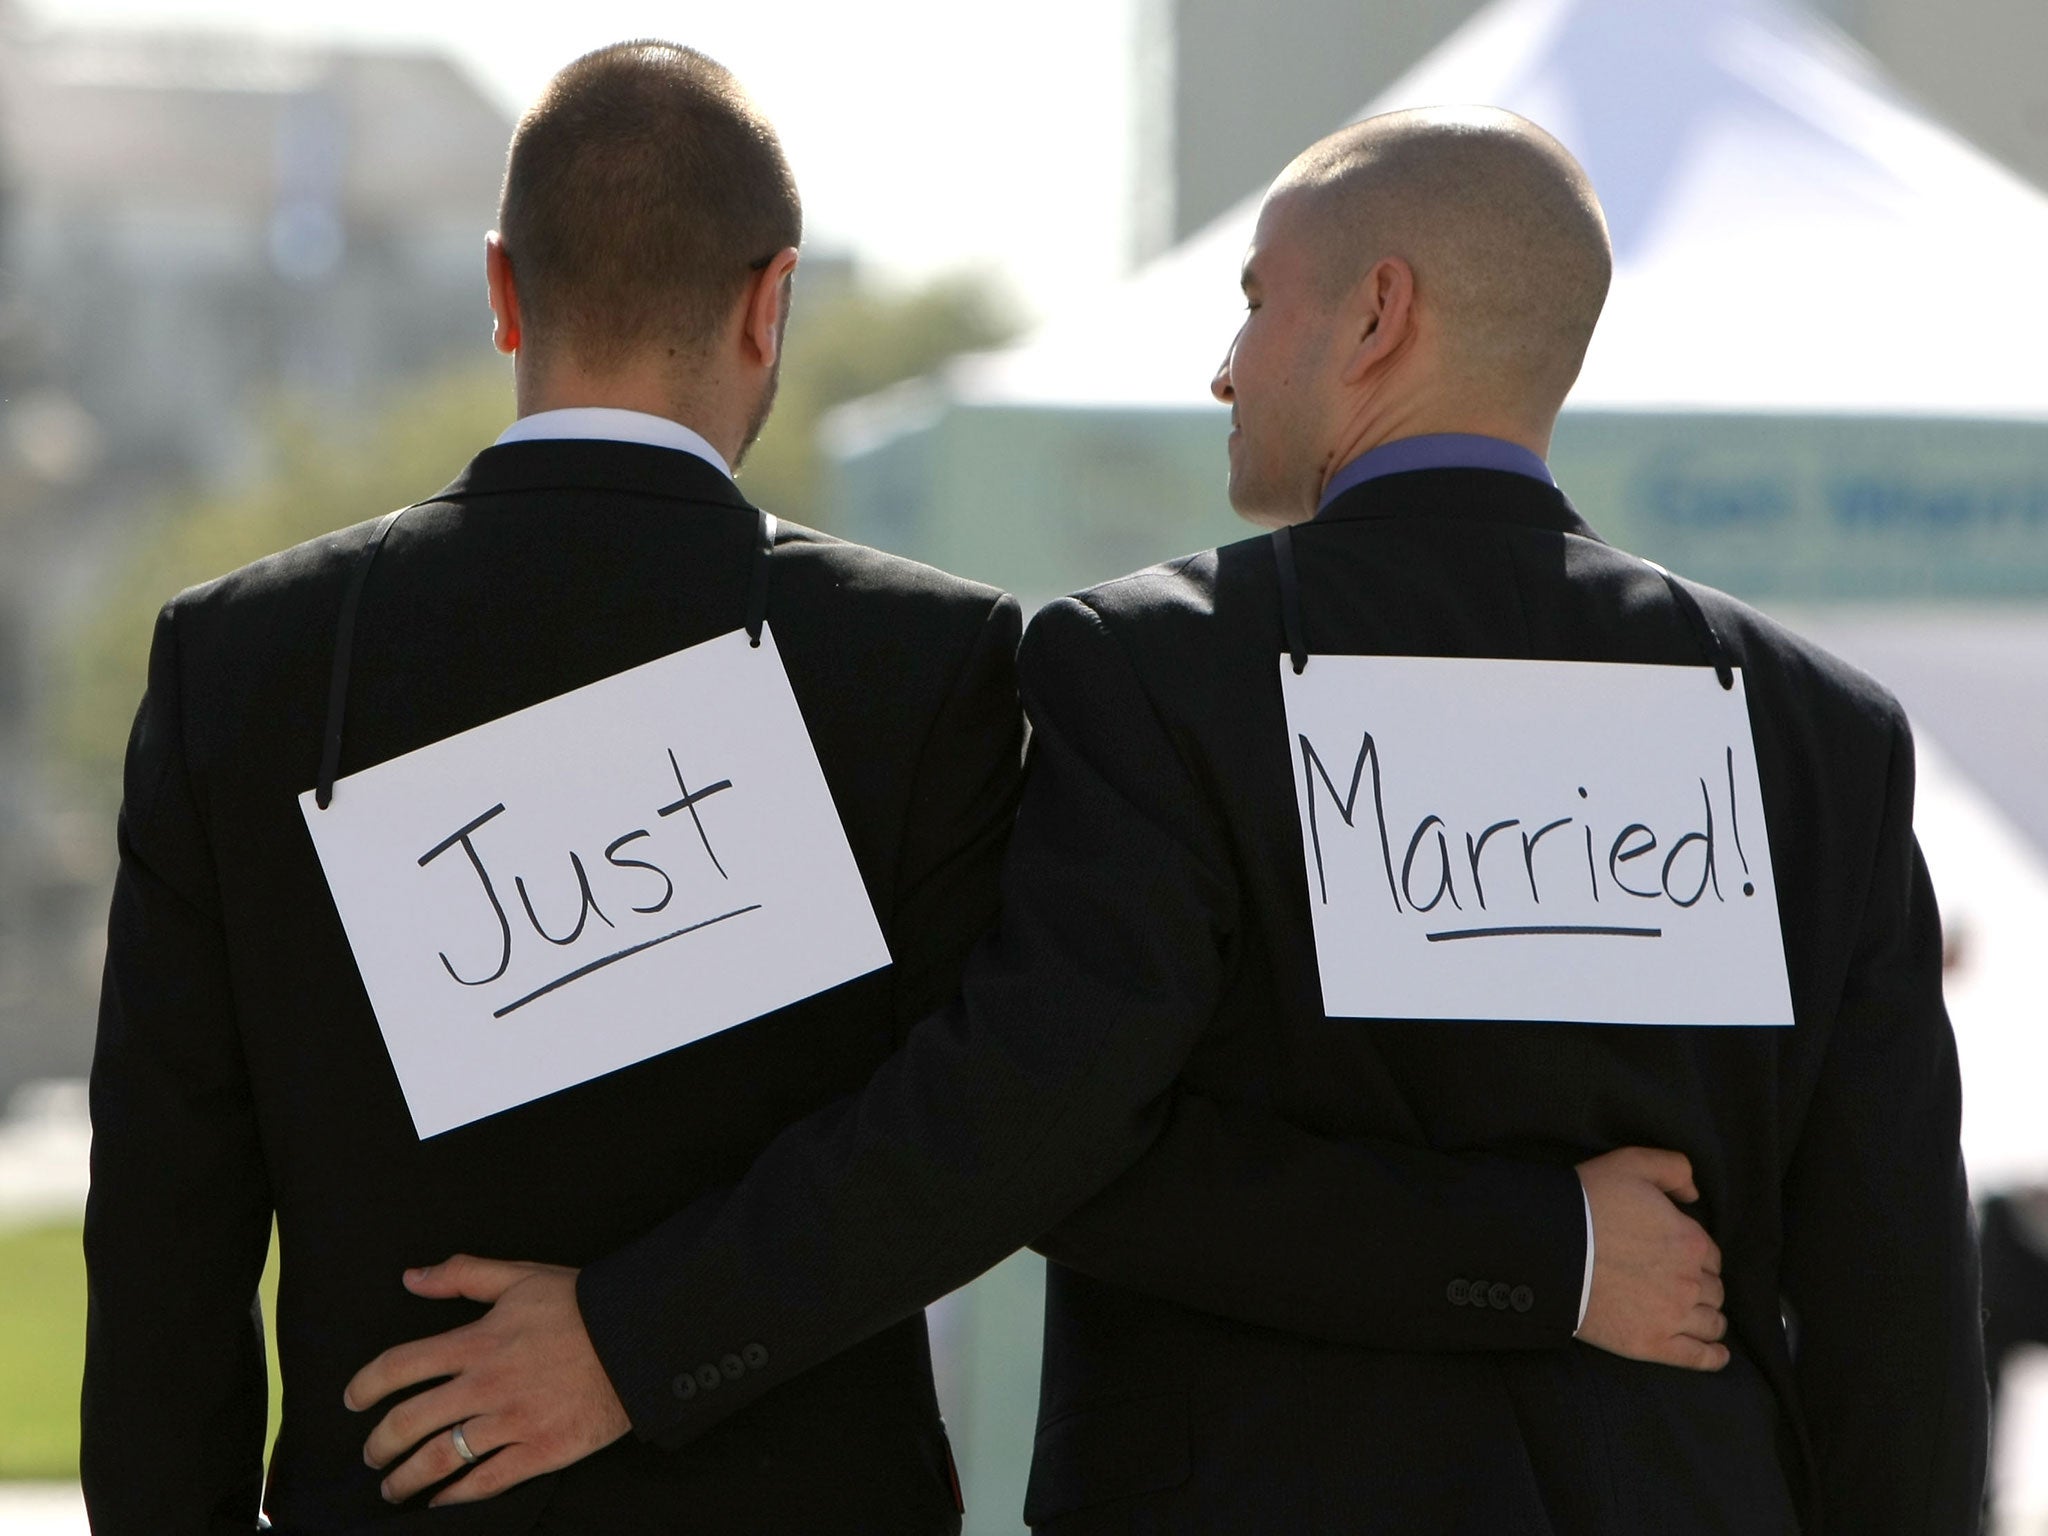 How the supreme court's decision for gay marriage could affect religious institutions